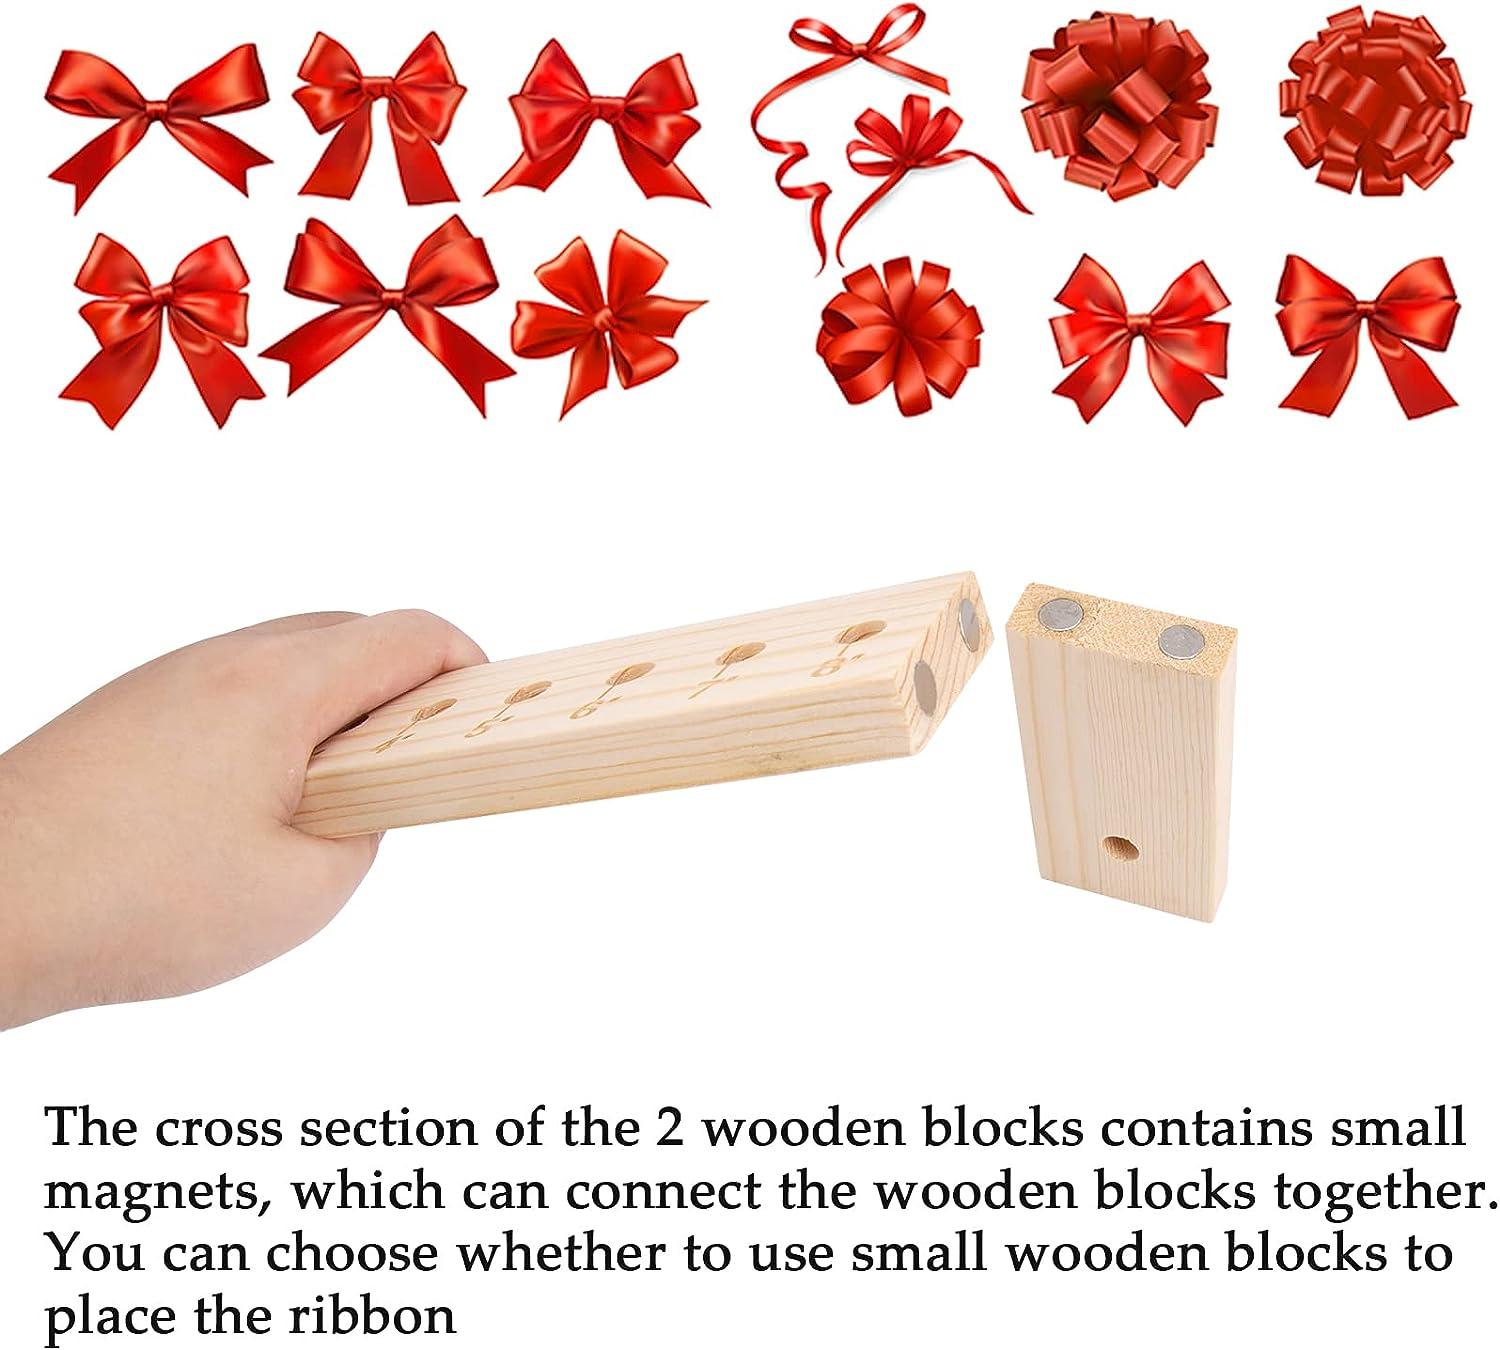 Durable Wooden DIY Bow Maker Tool For Ribbon Party Decorations